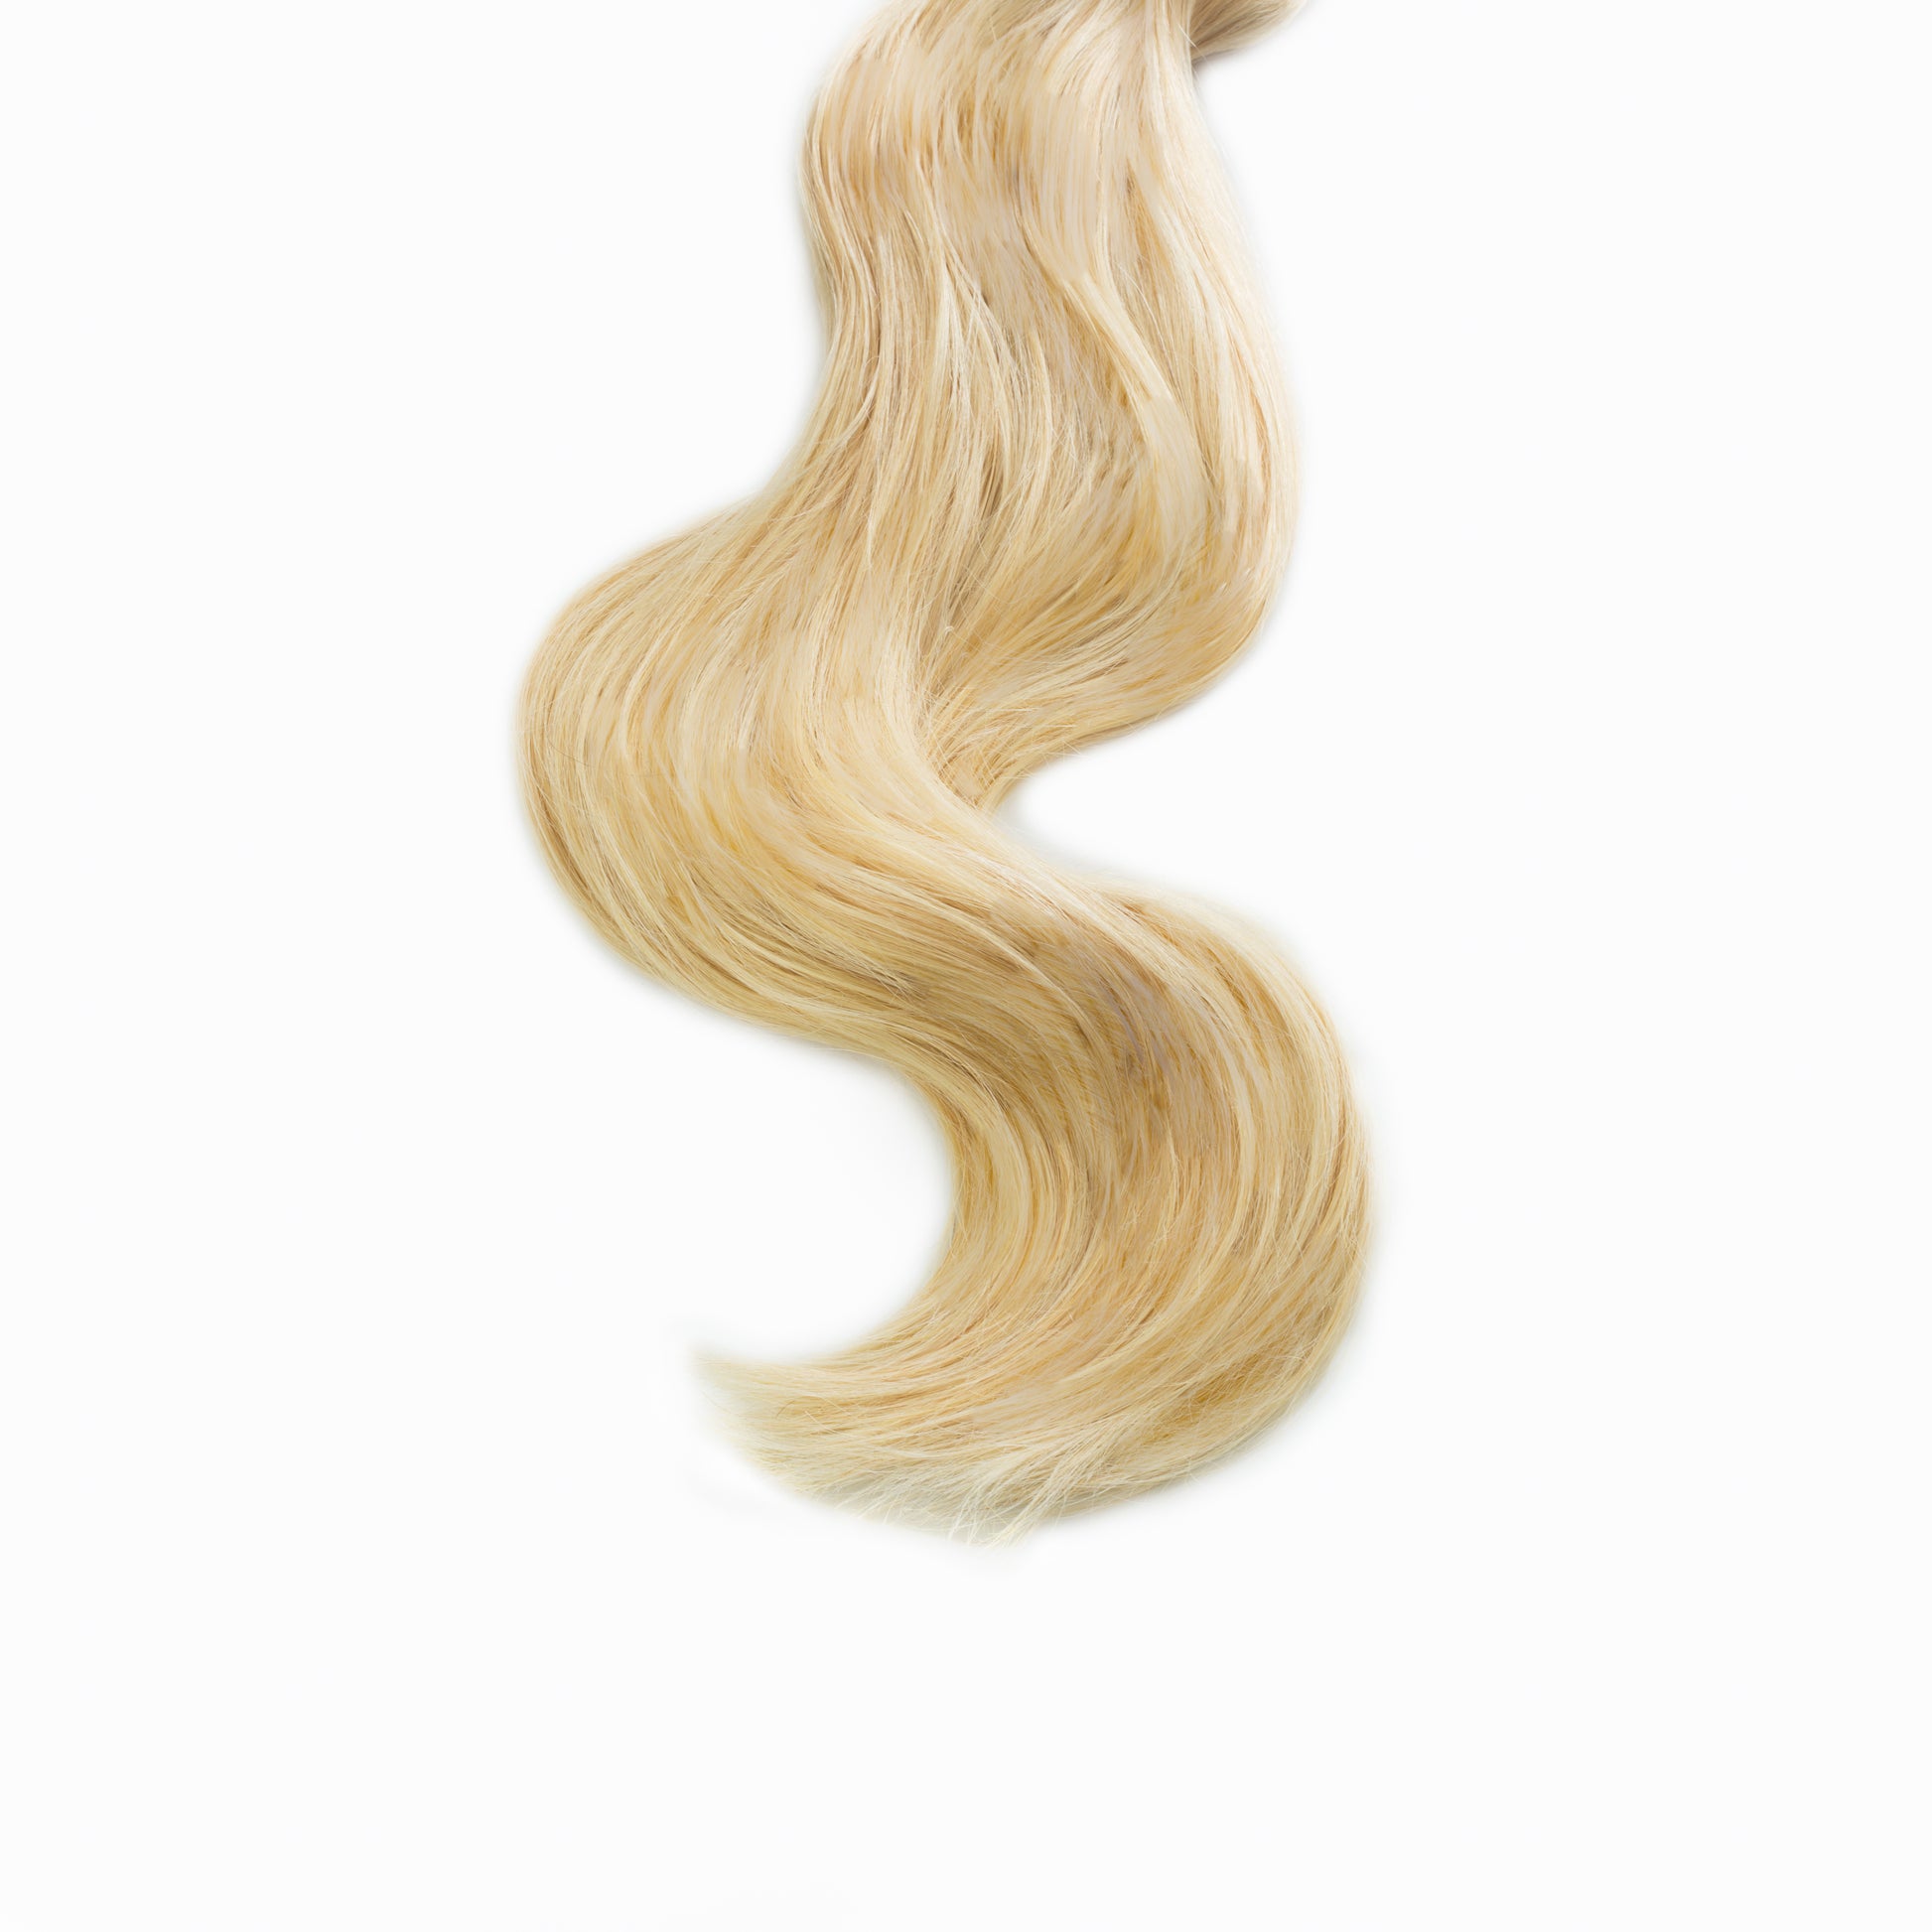 creme brulee blonde #22 tape hair extensions 4 remi human hair minque hair extension